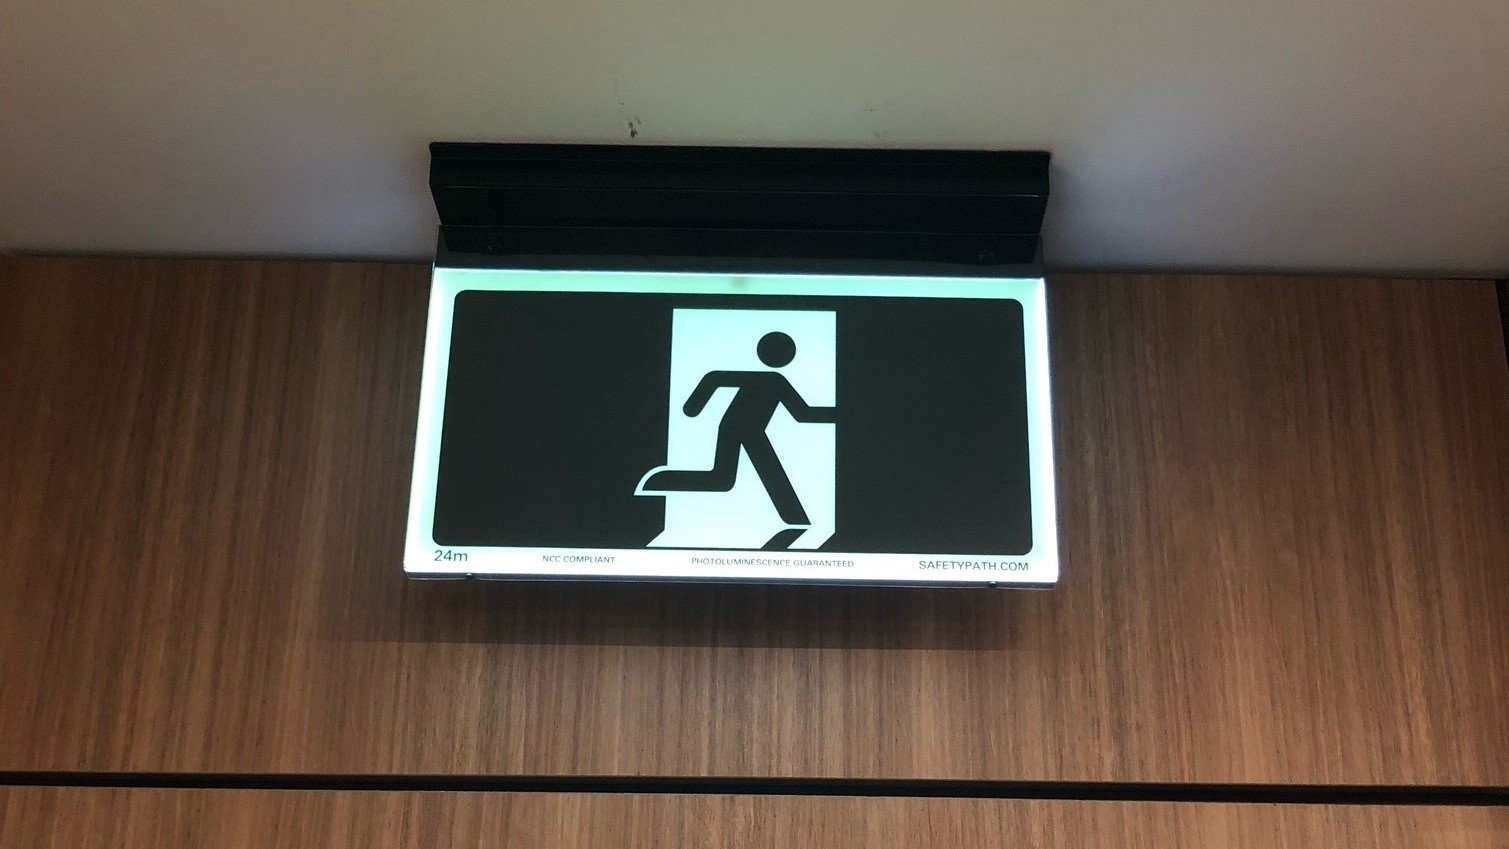 Melbourne Business School Hybrid Exit Sign by Safety Path